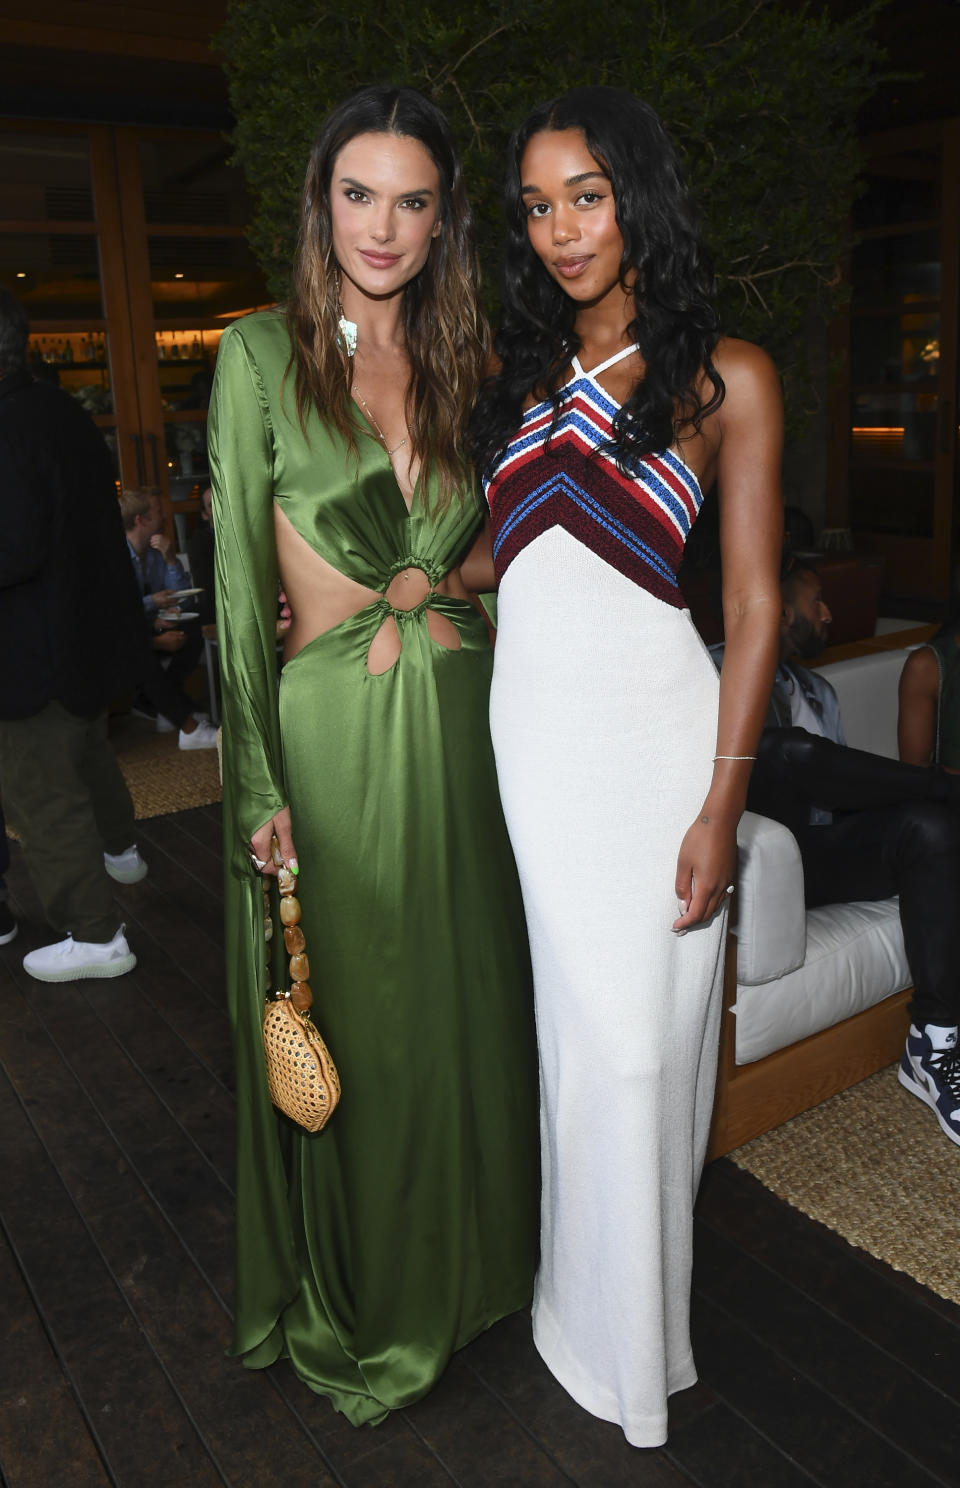 Alessandra Ambrosio and Laura Harrier attend the Audi x Nobu Celebration of Design Event in Malibu, California on August 11, 2021. - Credit: Michael Buckner for PMC